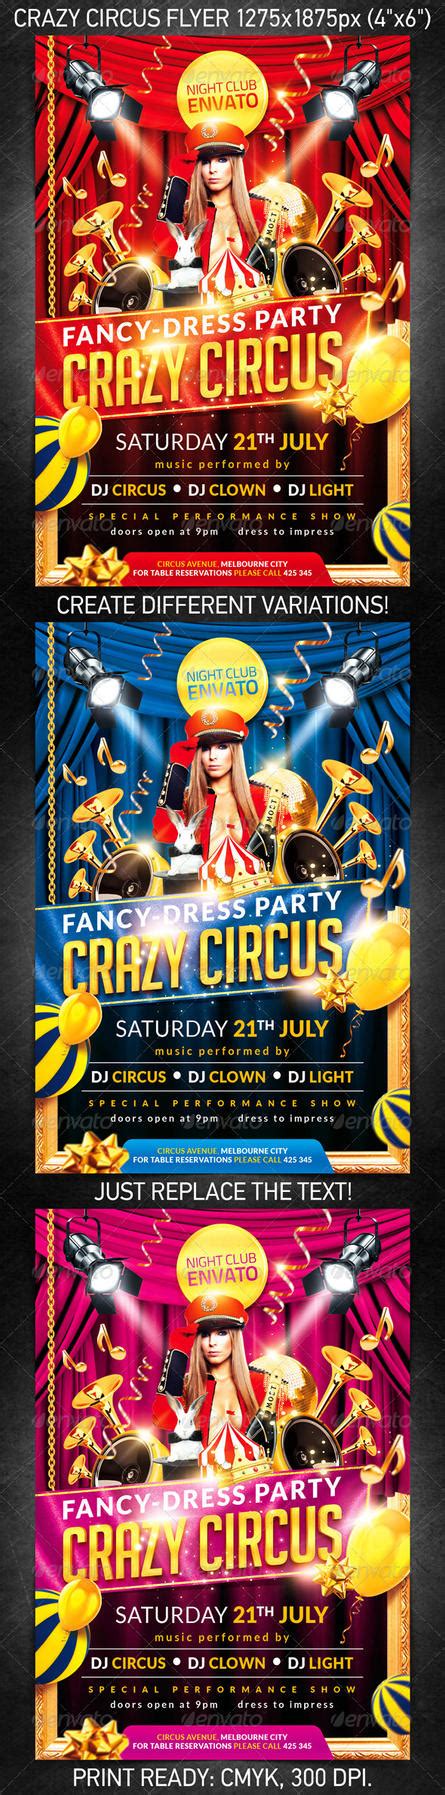 Crazy Circus Party Flyer, PSD Template by 4ustudio on deviantART